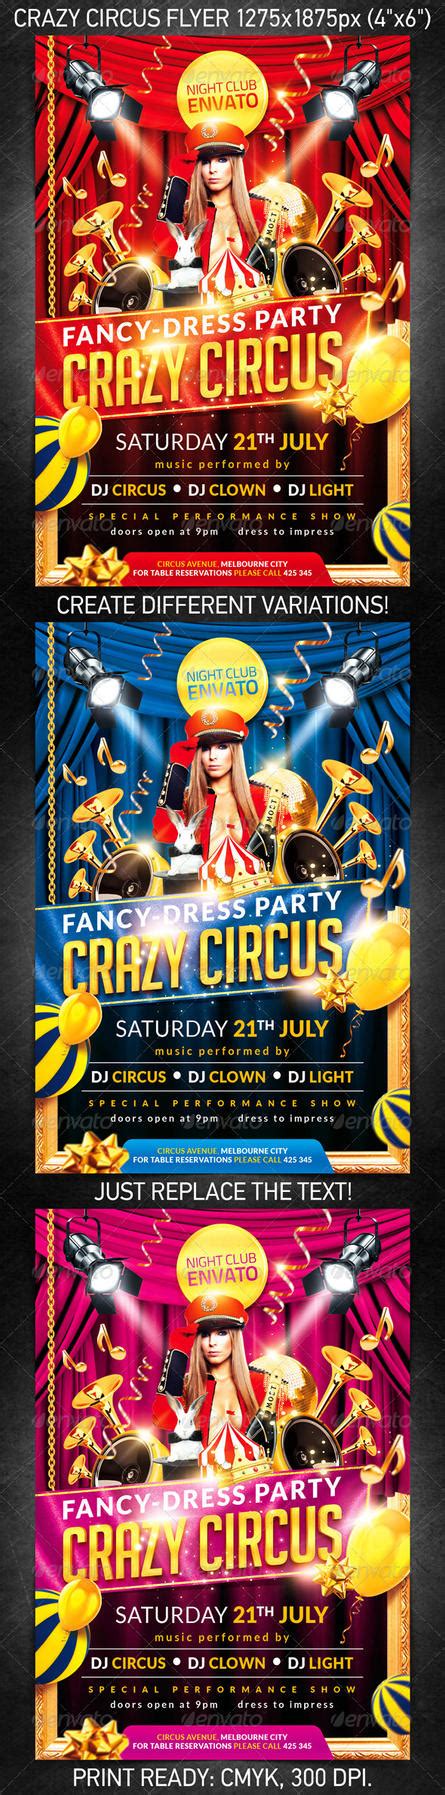 Crazy Circus Party Flyer, PSD Template by 4ustudio on deviantART